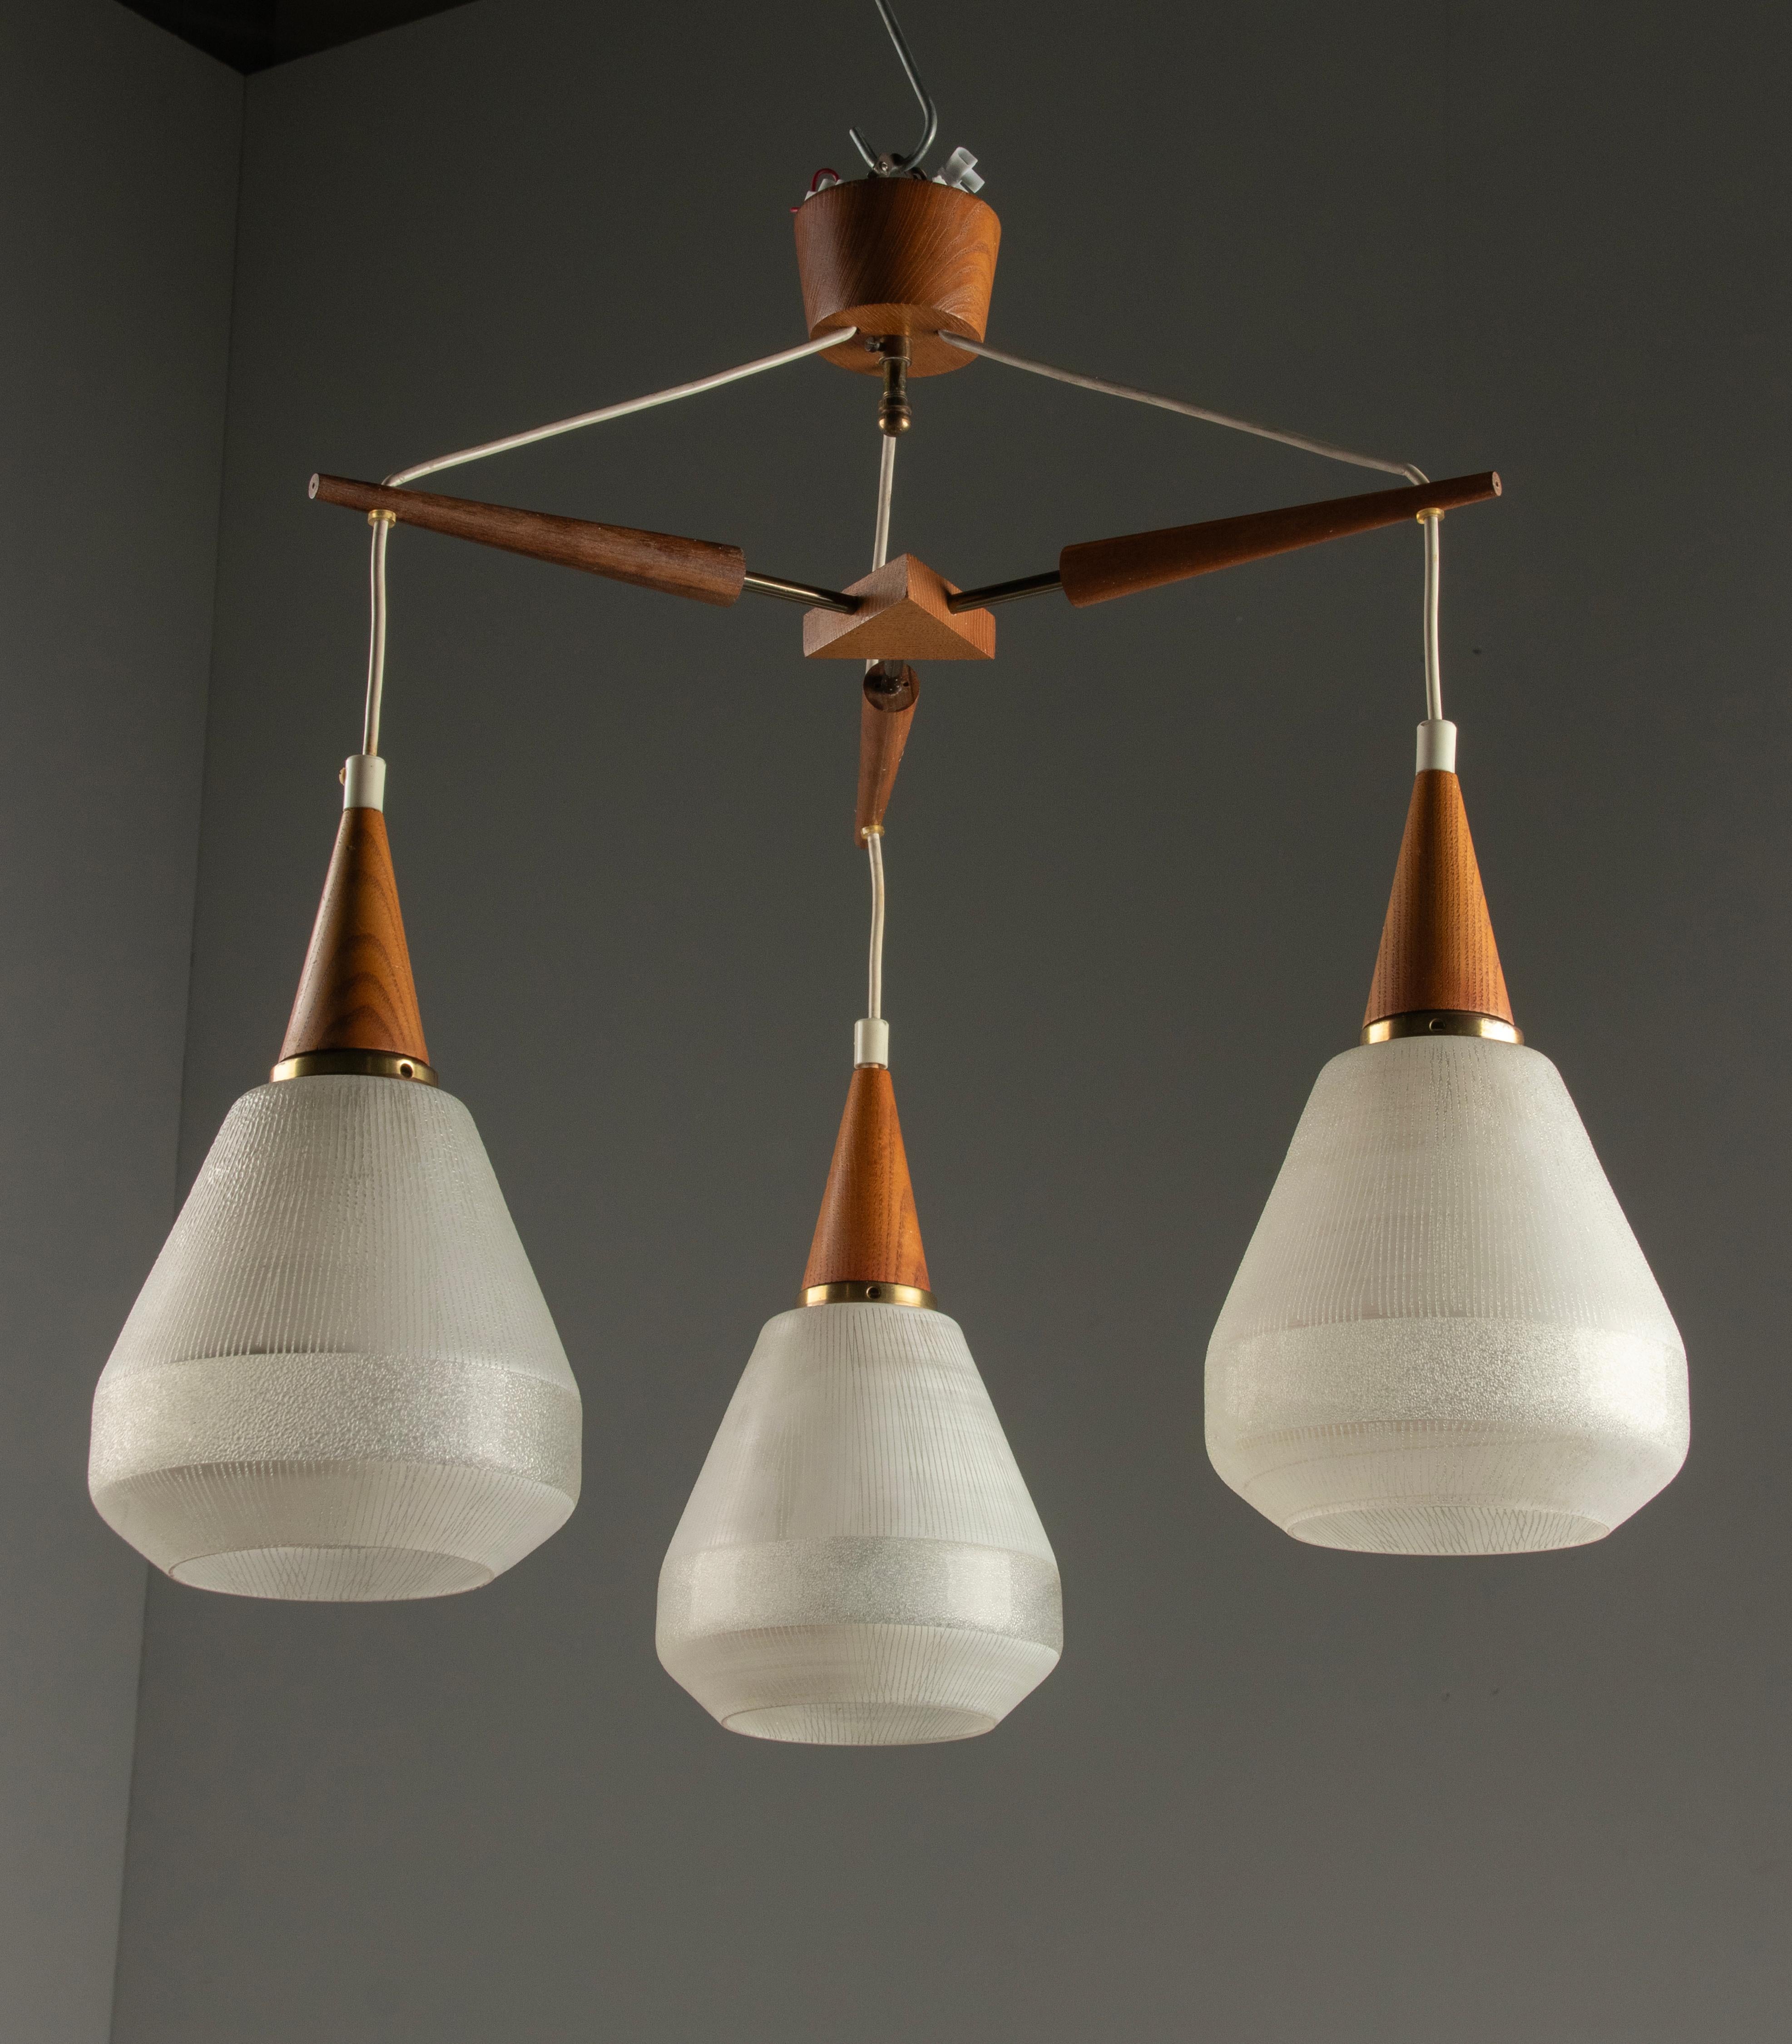 A vintage Danish pendant lamp, made of teakwood with frosted glass lampshades.
Made in Denmark around 1960-1970. Woodwork and glass are in good condition, no chips, hairlines or cracks.

Dimensions: 59 (h) x 56 x 56 cm
Dimension glass shade: Ø 15